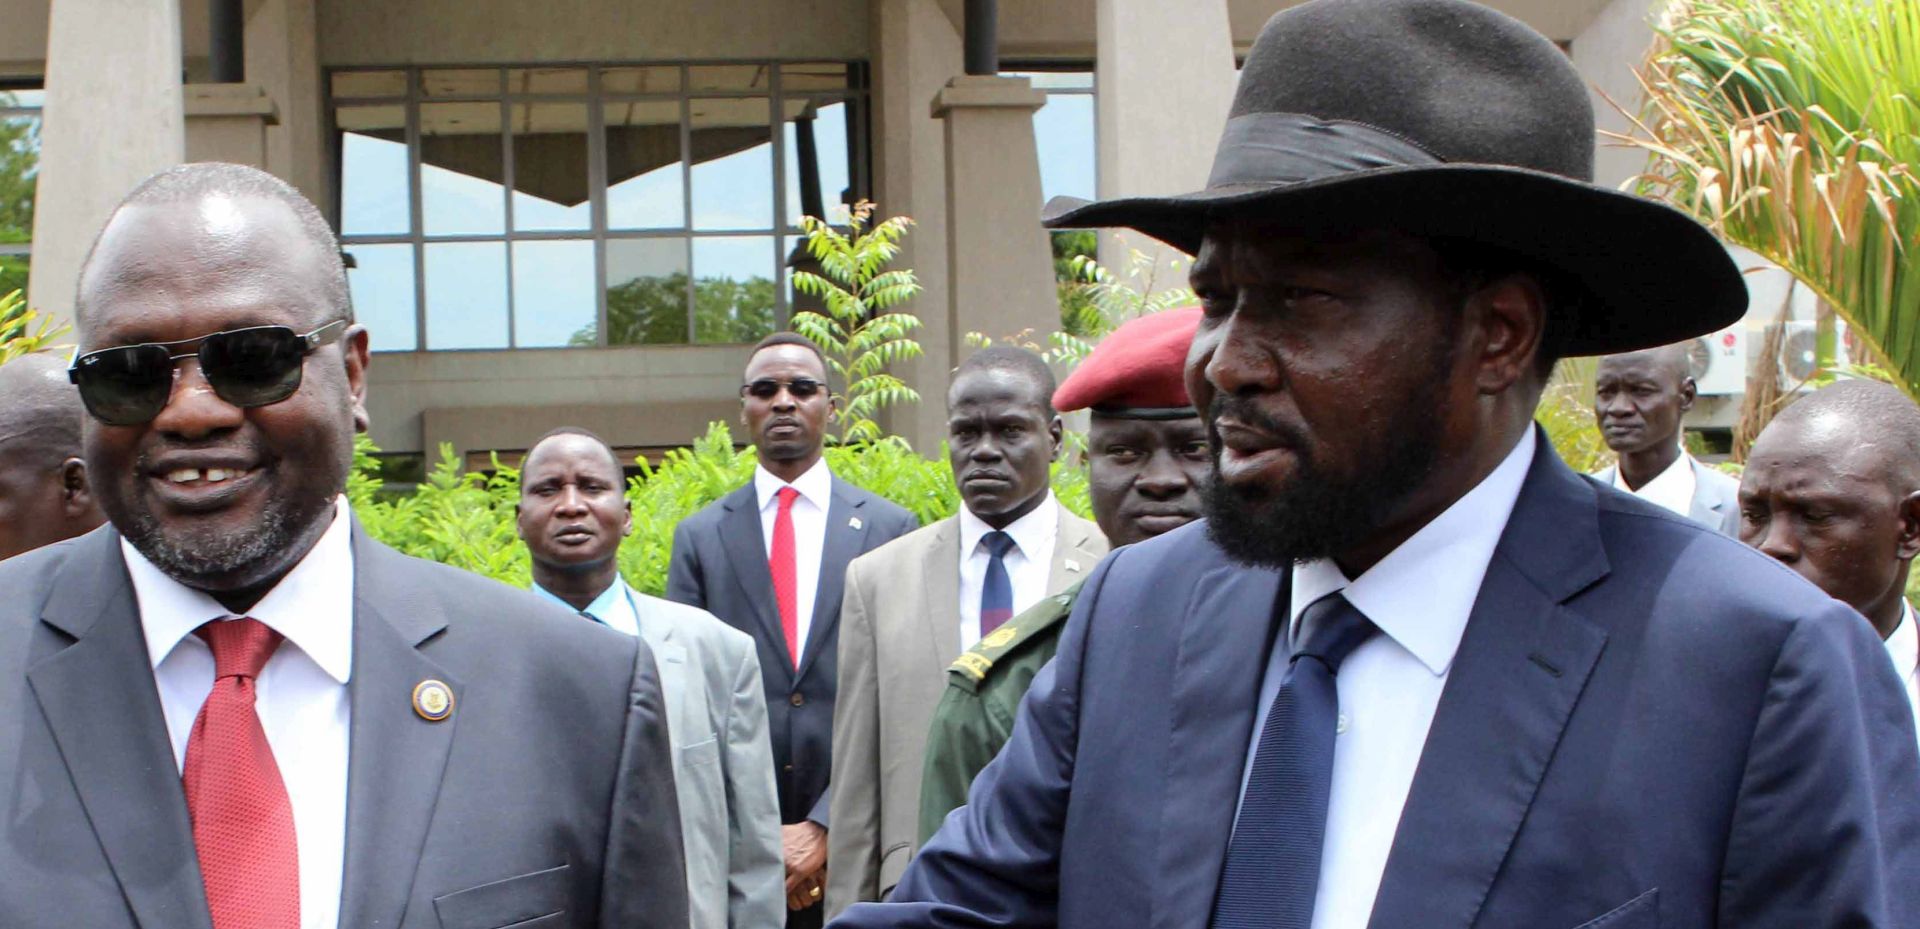 epa05418547 (FILE) A file photo dated 29 April 2016 shows South Sudan President Salva Kiir (R) shaking hands with former rebel leader and First Vice-President Riek Machar (L) after a new unity government was sworn-in, Juba, South Sudan. Reports on 10 July 2016 said hundreds were killed in two days of renewed fighting between supporters of President Salva Kiir and Vice-President Riek Machar. The UN Security Council condemned the fighting that erupted in Juba, the worst violence since a peace deal was signed in 2015 and forming the national unity government in April this year.  EPA/PHILLIP DHIL